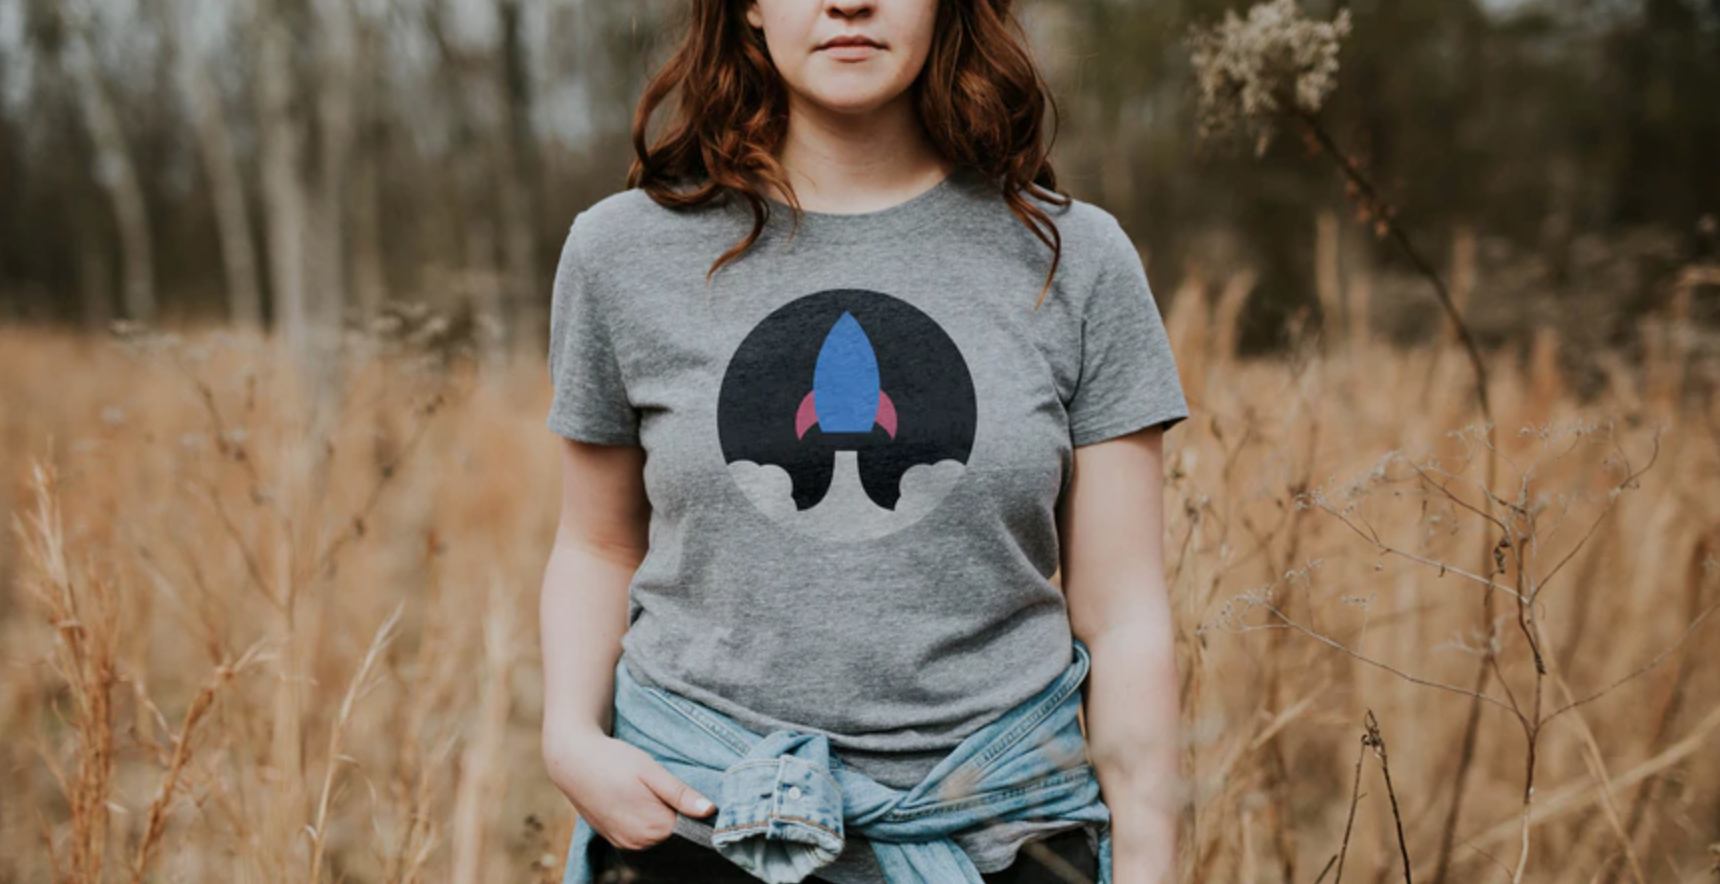 Handmade, Cotton Rocket Ship Tee Shirt inspired by Space Exploration